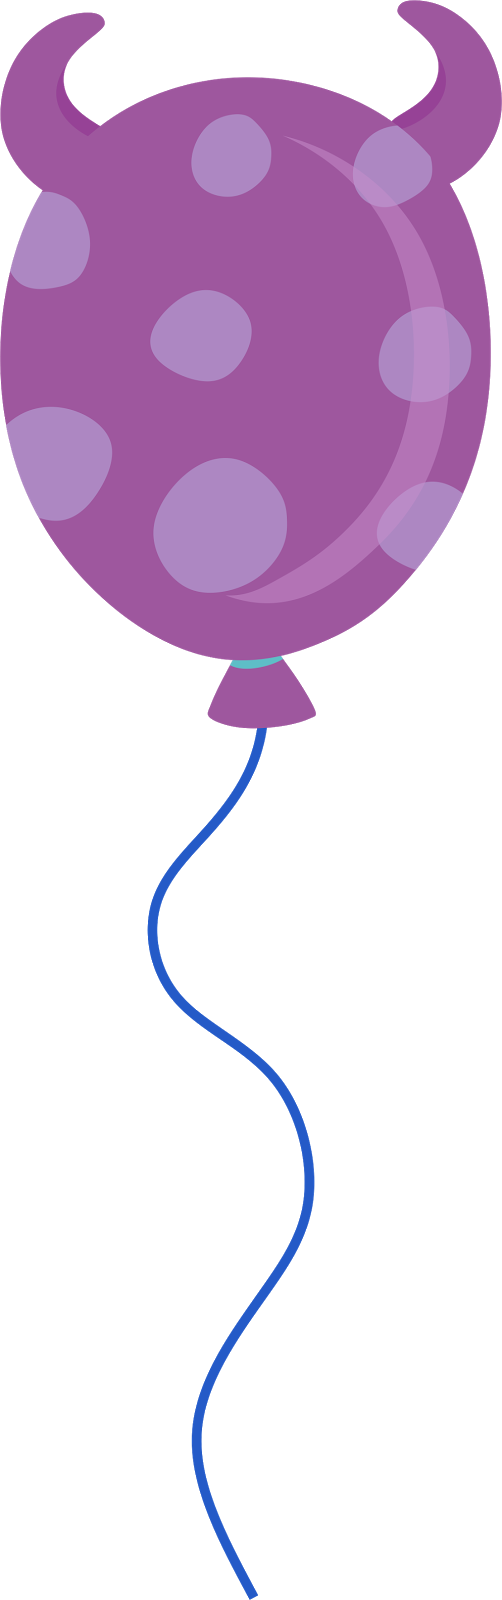 clipart balloons monsters inc